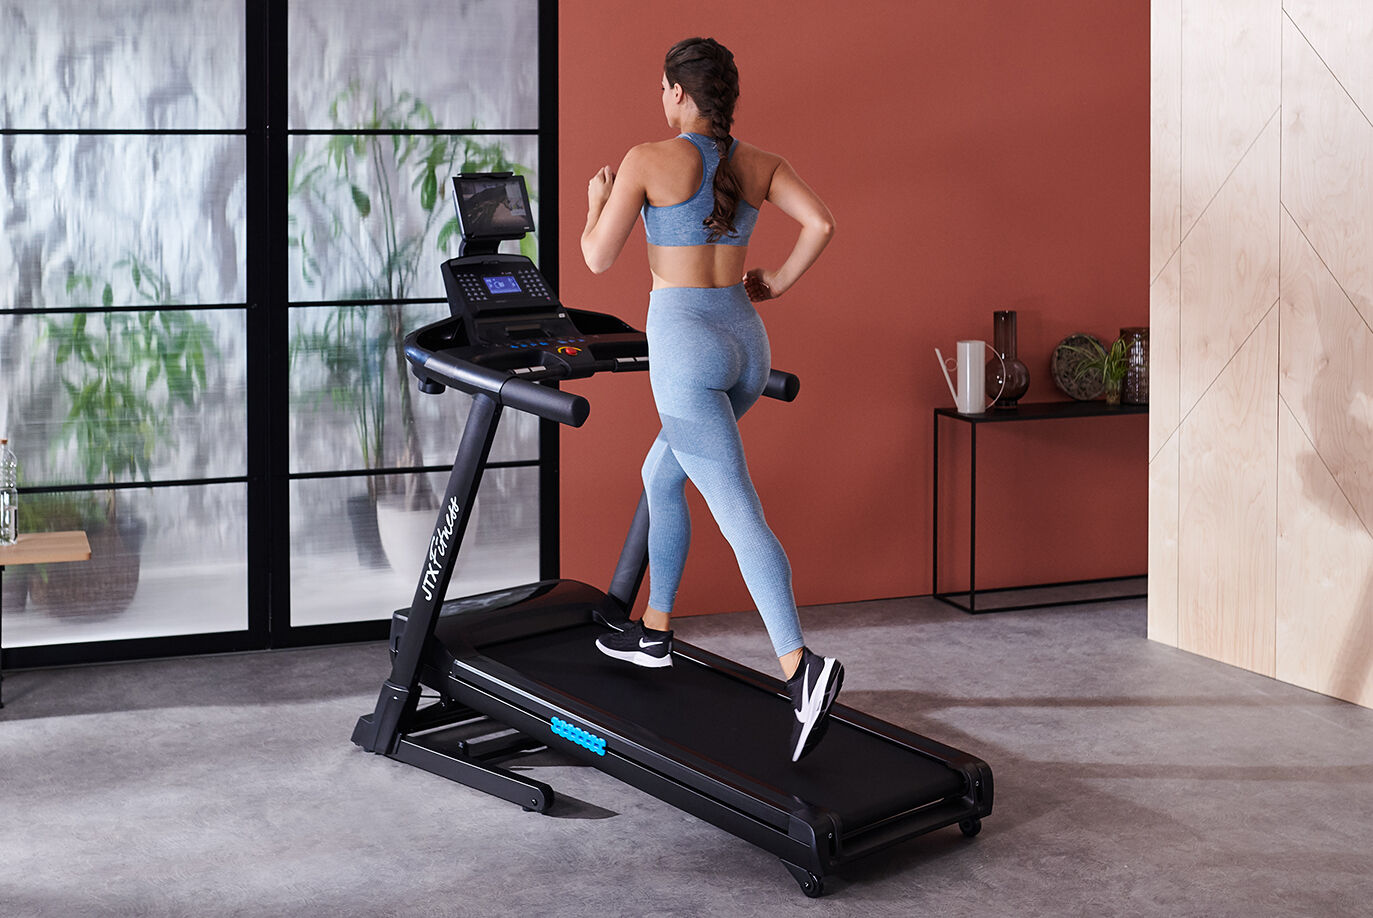 Is Incline Treadmill Good For Fat Loss
